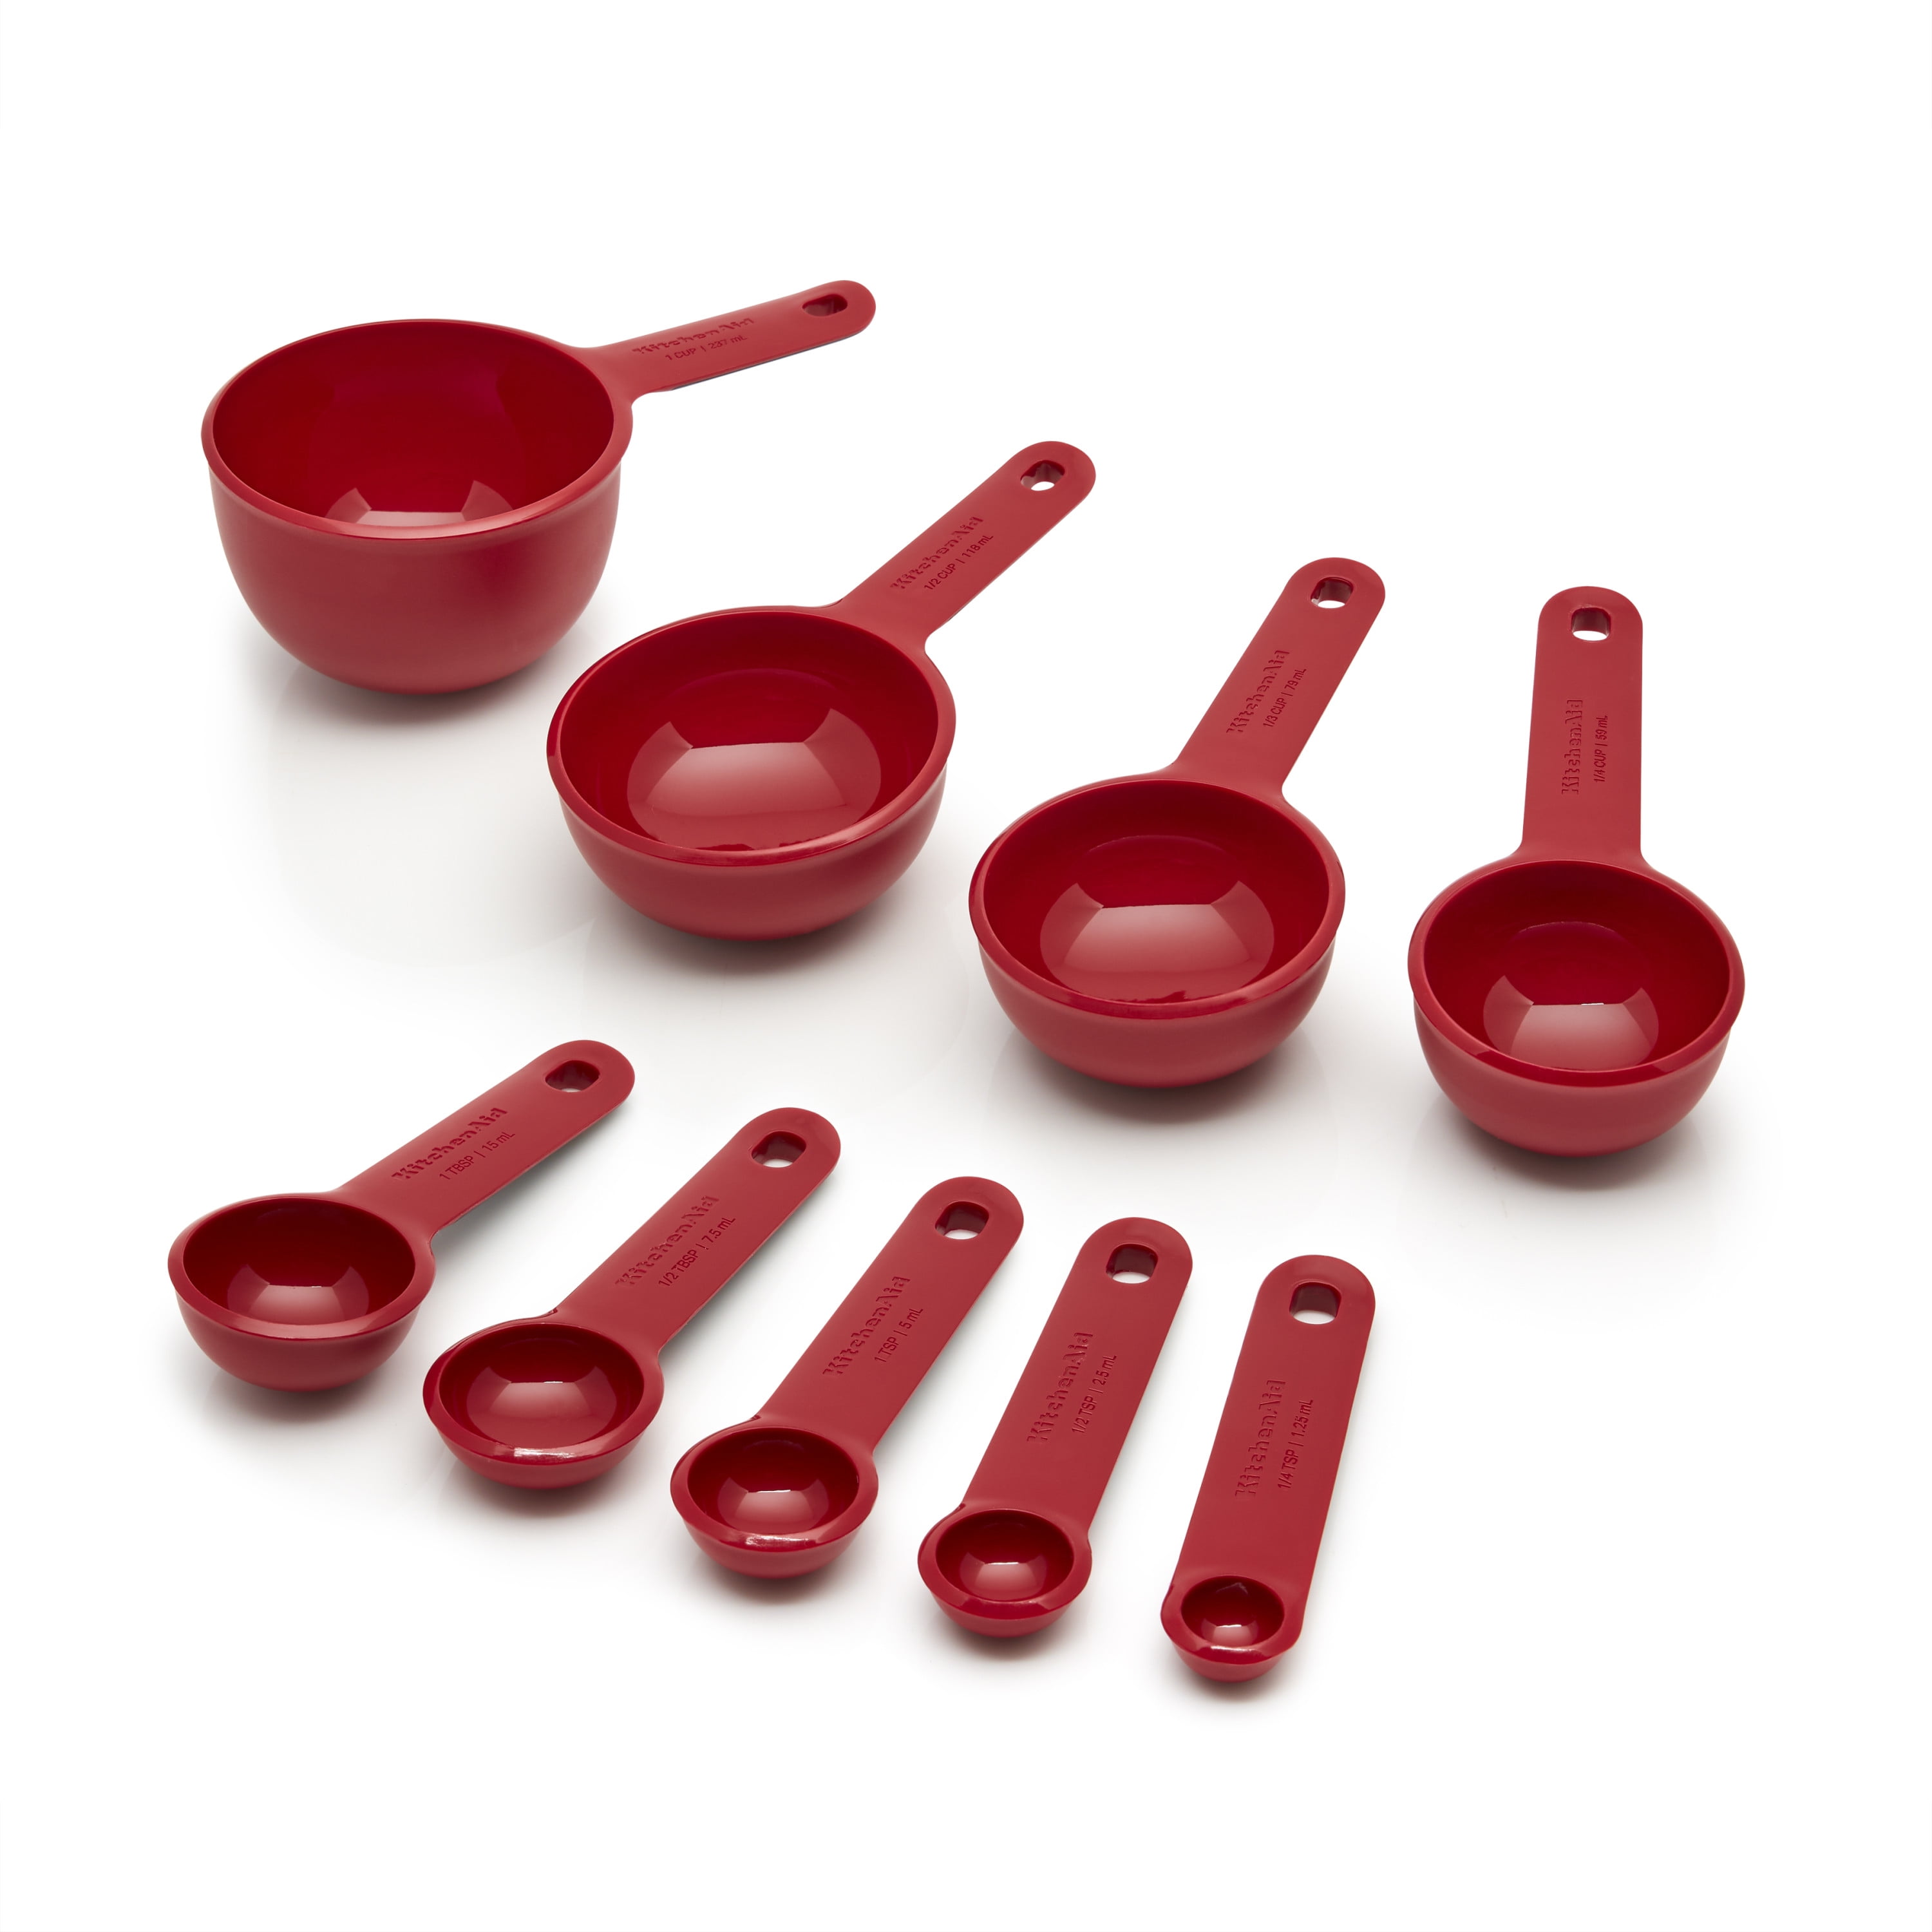 KitchenAid Classic Measuring Cups and Spoons Set 9 pcs